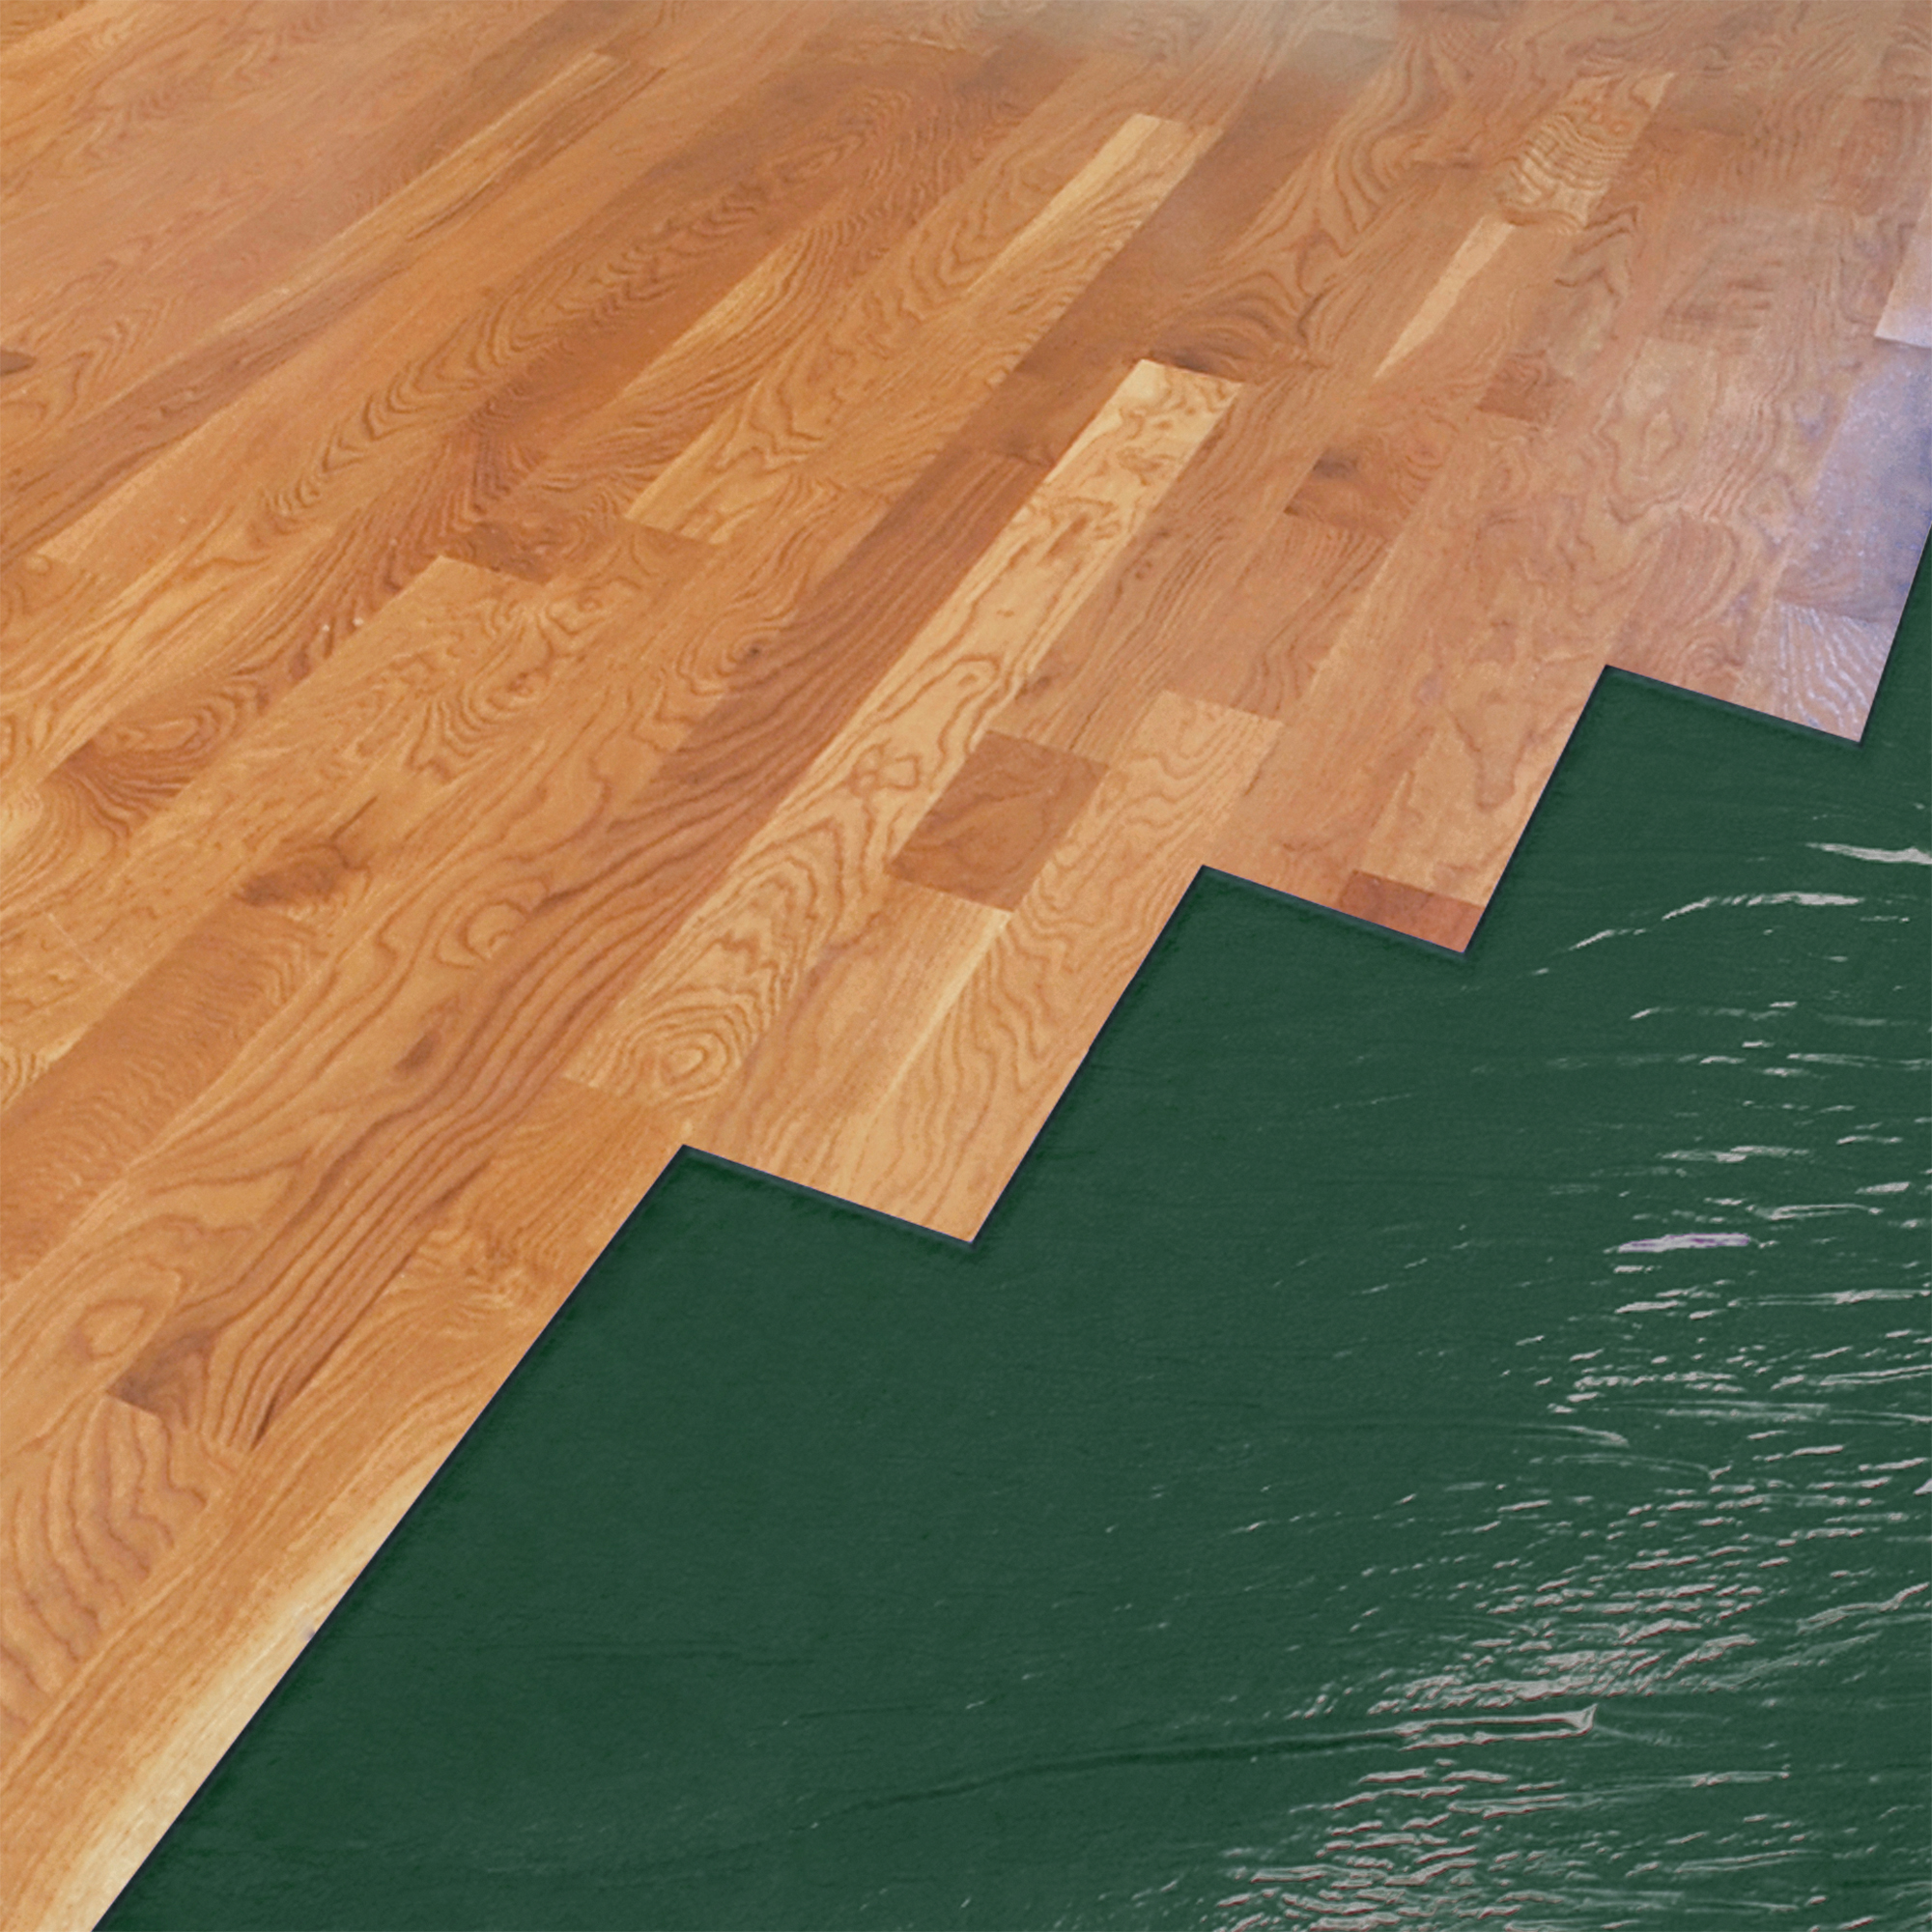 Underlayments Roberts Consolidated, Can Felt Paper Be Used Under Laminate Flooring